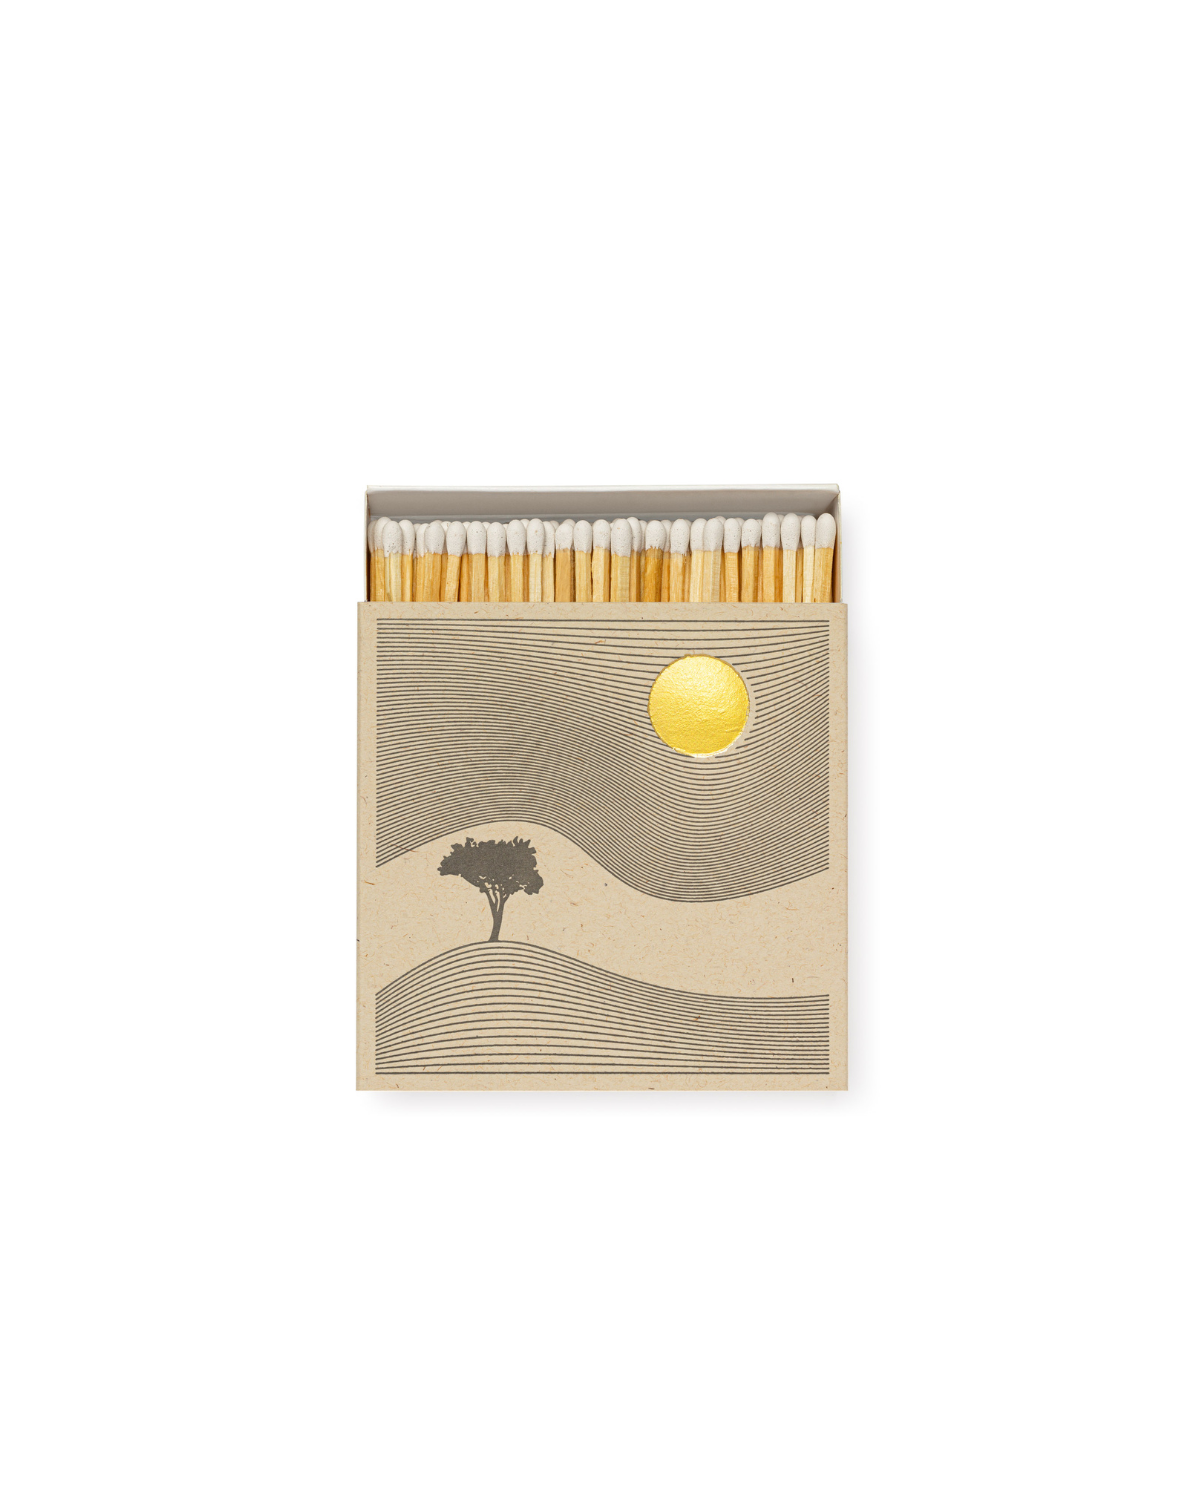 The One Tree Hill matchbox design by Real Fun, Wow! is a best-seller round the clock. A master of the minimal, our good friend Daren Thomas Magee brings dreamy scenes of nature into the home with this gorgeous design.